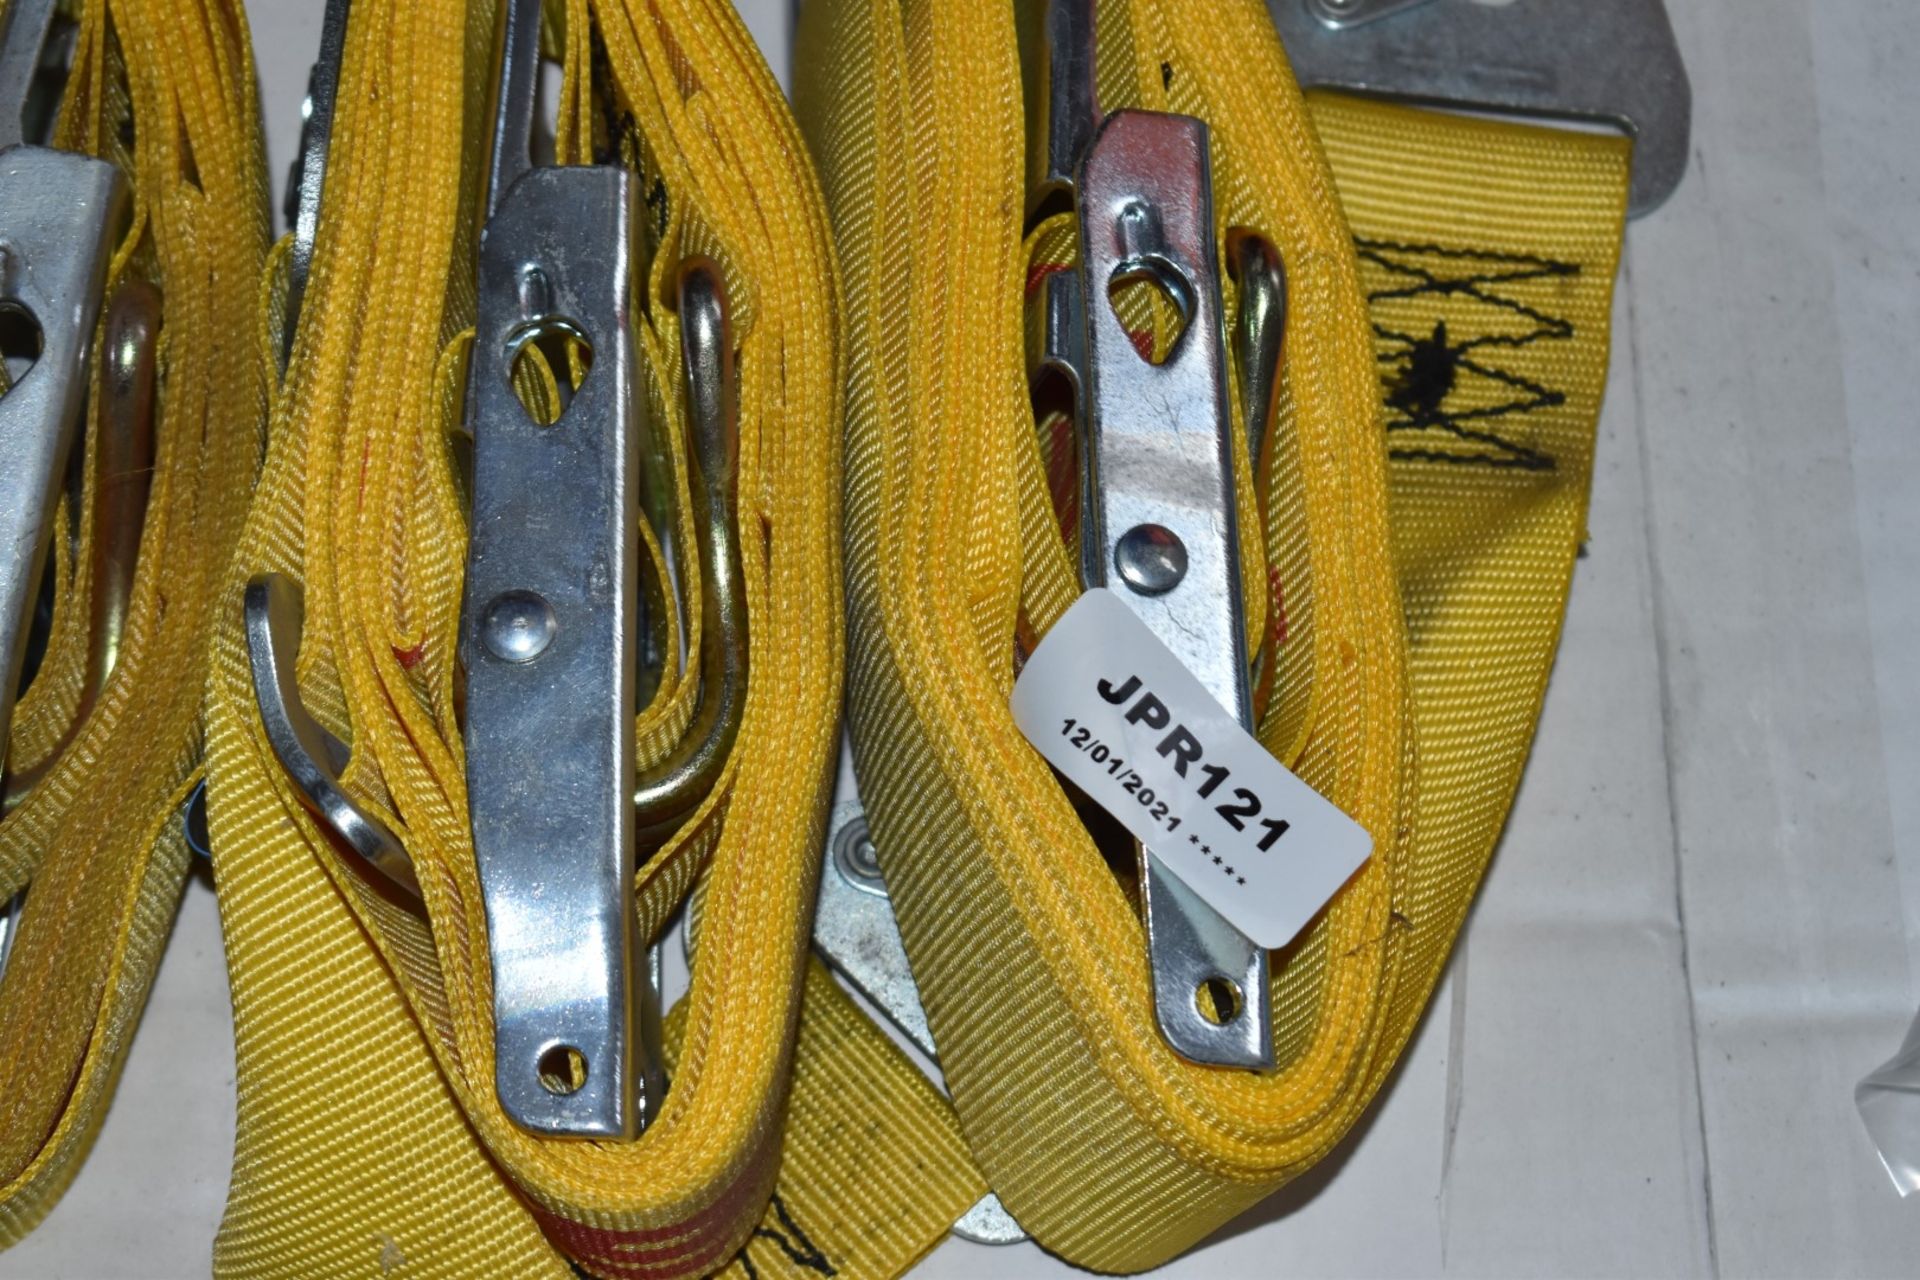 6 x TRP Load Control Cargo Vehicle Straps - 4m Length - CL622 - Ref JPR121 WH1 - Location: - Image 5 of 5